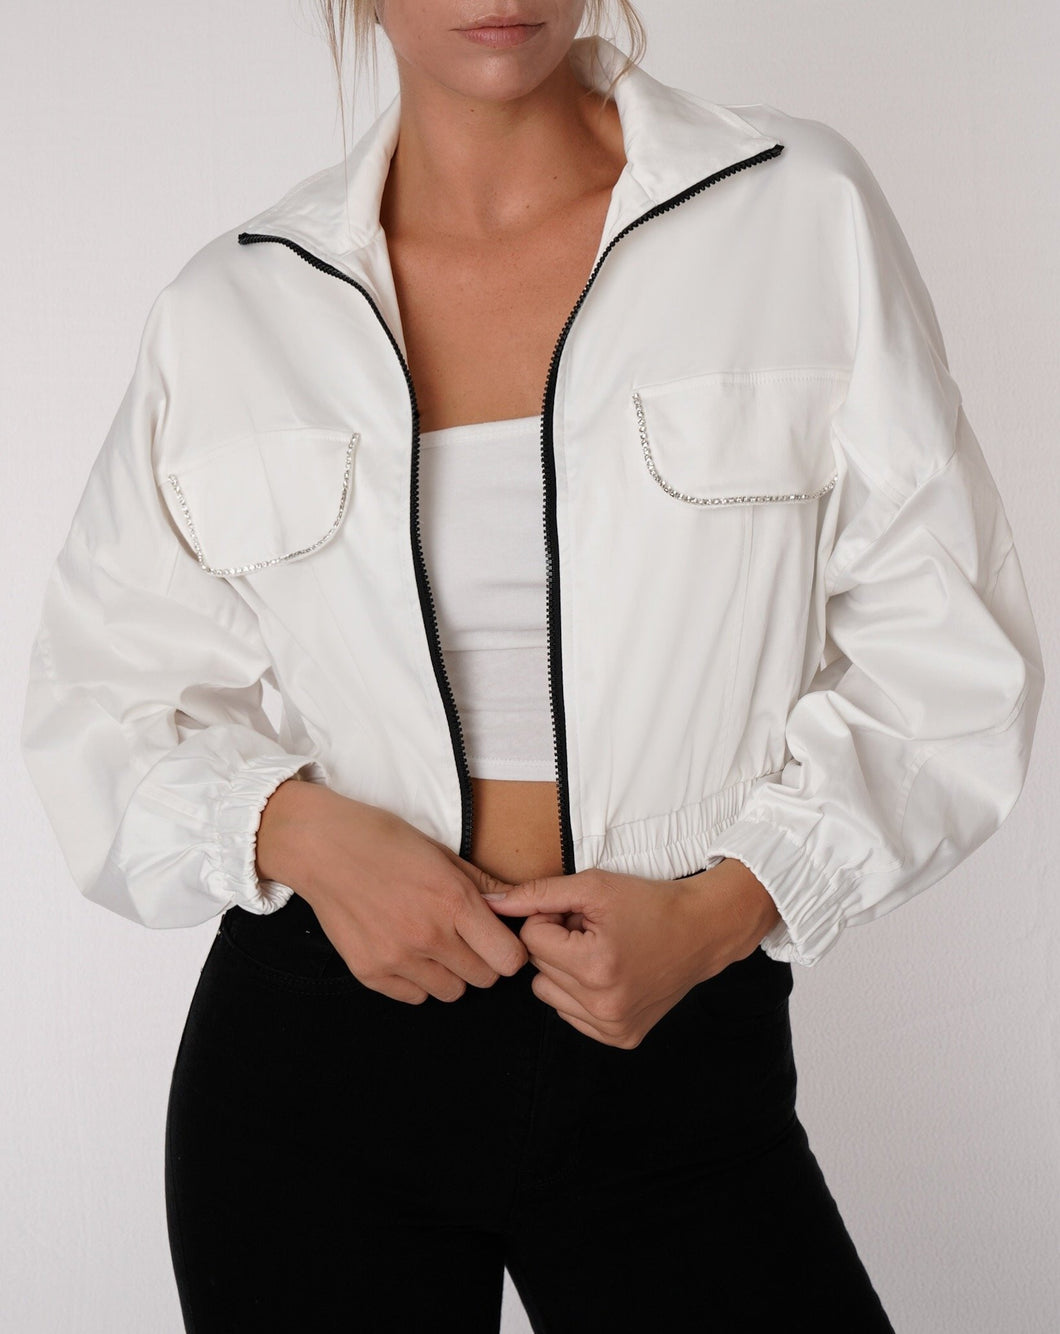 crystal jackets, jackets, womens clothing, fashion, womens fashion, womens clothes, fashion nova, revolve, faLL collection, topshop, zara, prettylittlething, princesspolly, online boutique, puff sleeves, satin dress, fall style 2020, fall fashion 2020, winter jackets, white jackets, women's outerwear, 